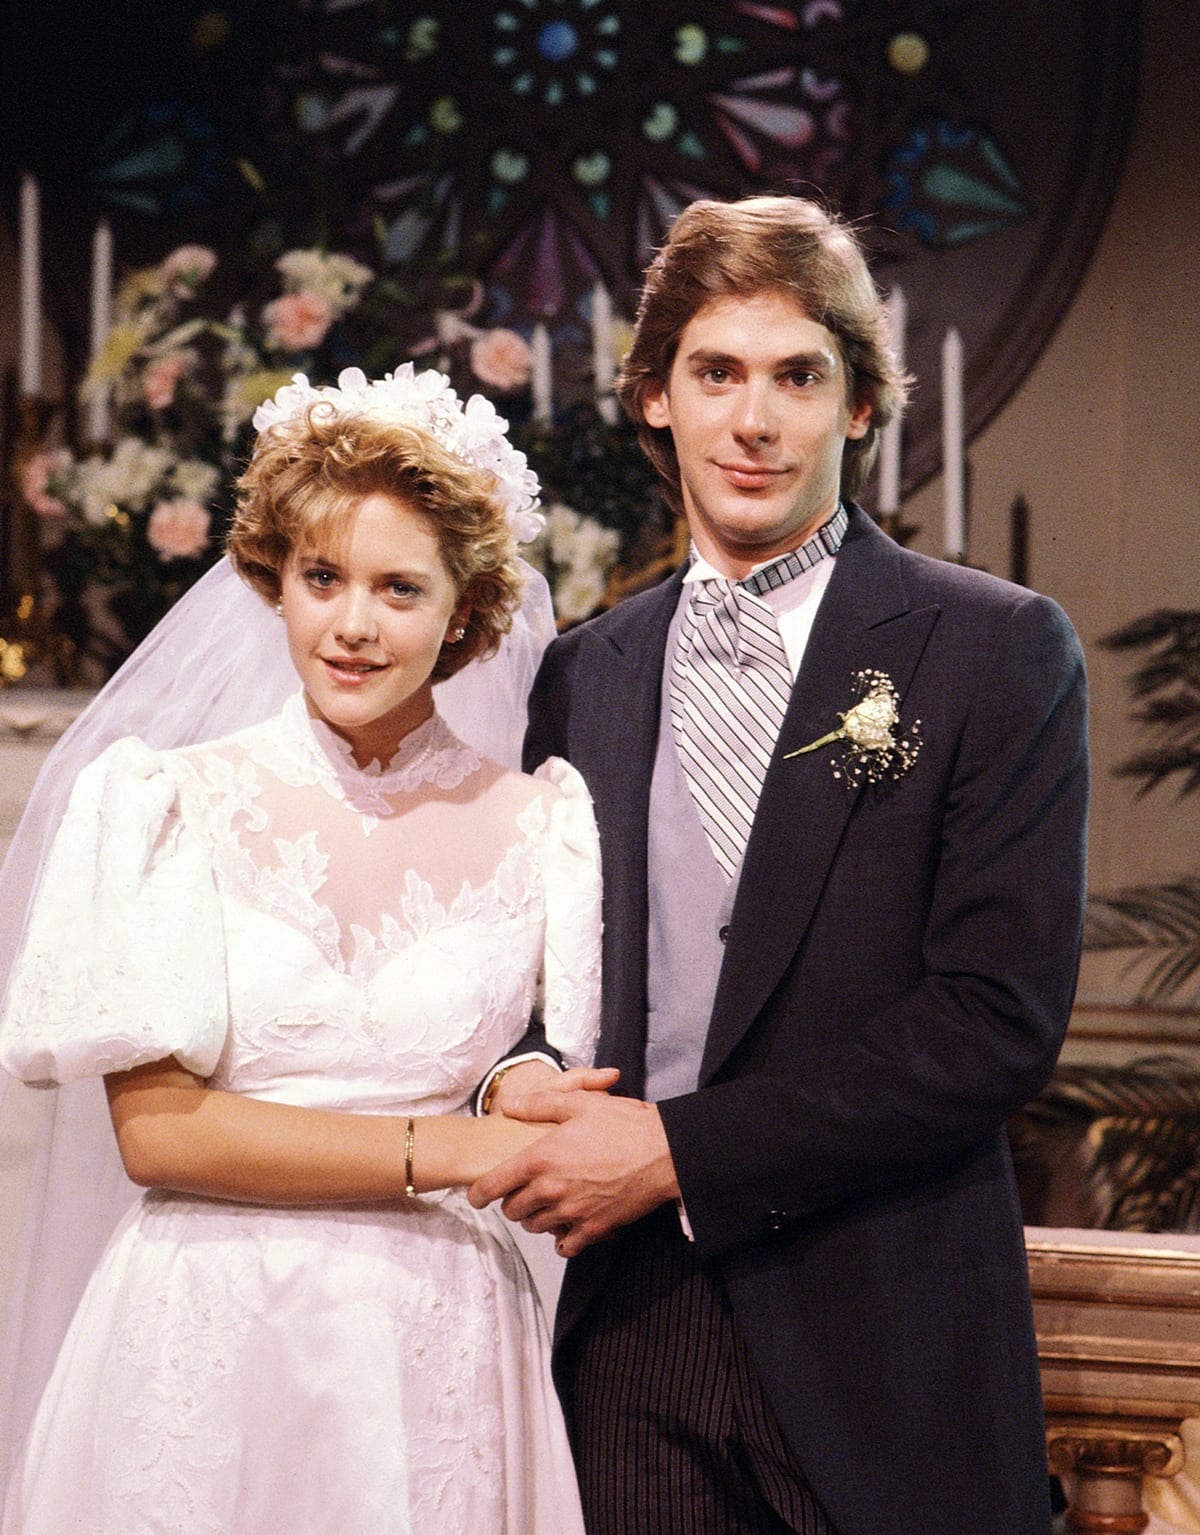 Megan Ryan was 20 years old when she joined the cast of the CBS soap opera As the World Turns as Betsy Stewart with Scott Bryce as Craig Montgomery in 1982